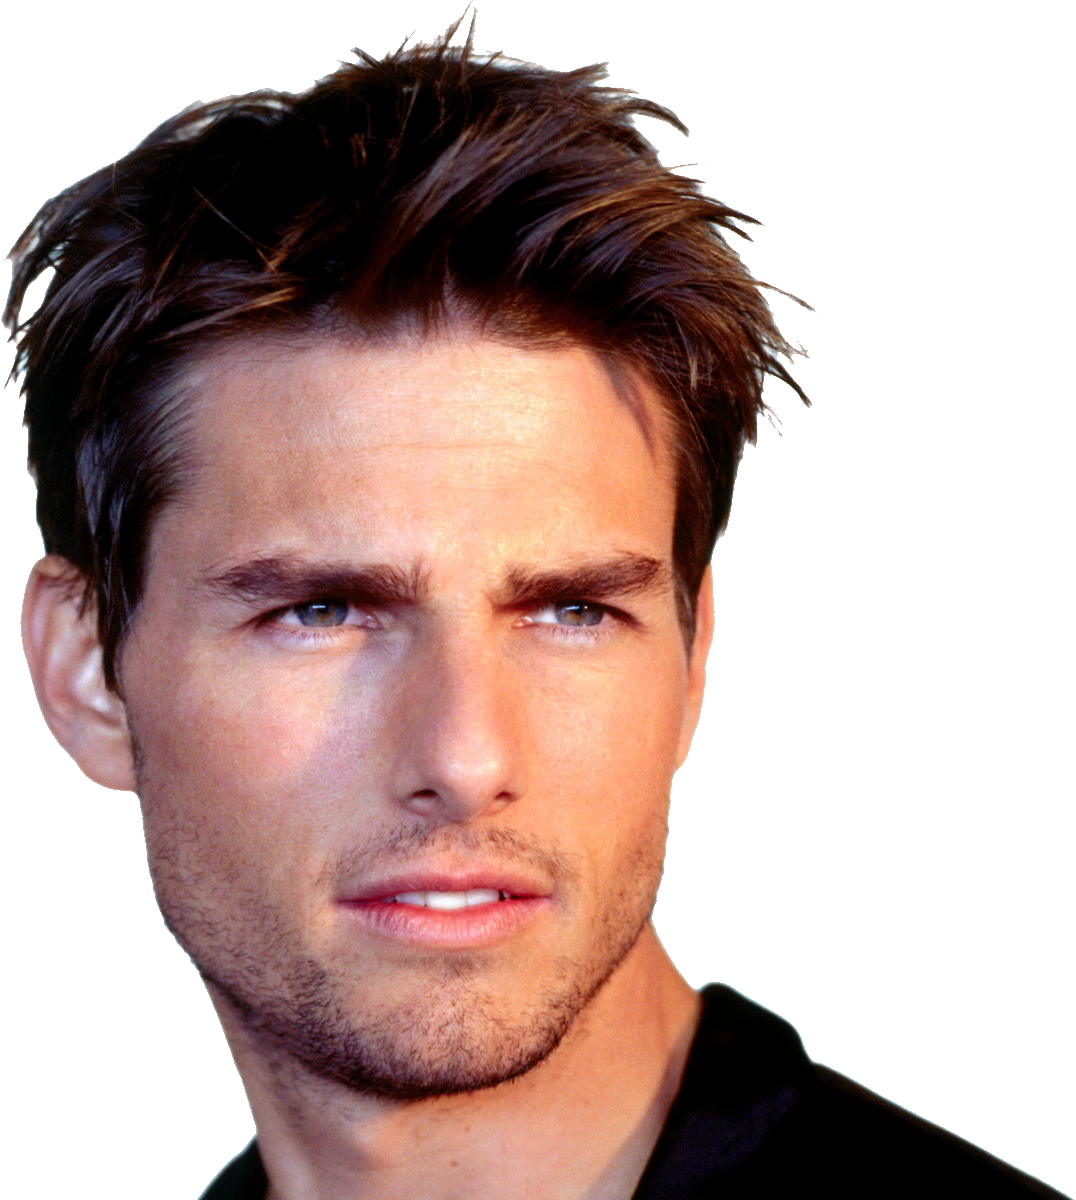 Tom Cruise PNG images Download 